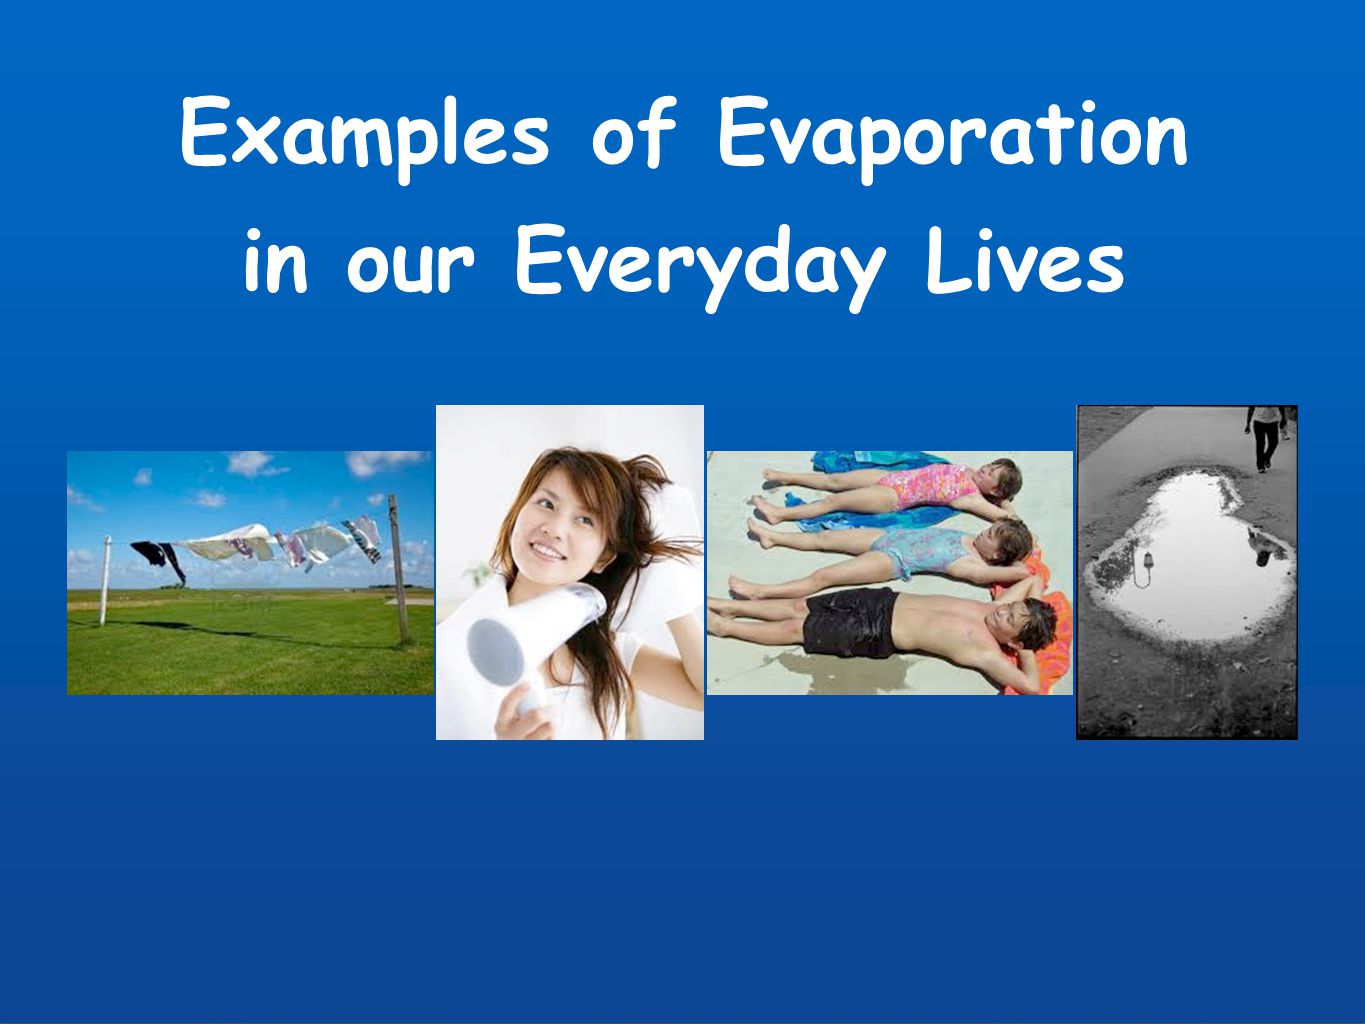 Examples of Evaporation in our Everyday Lives